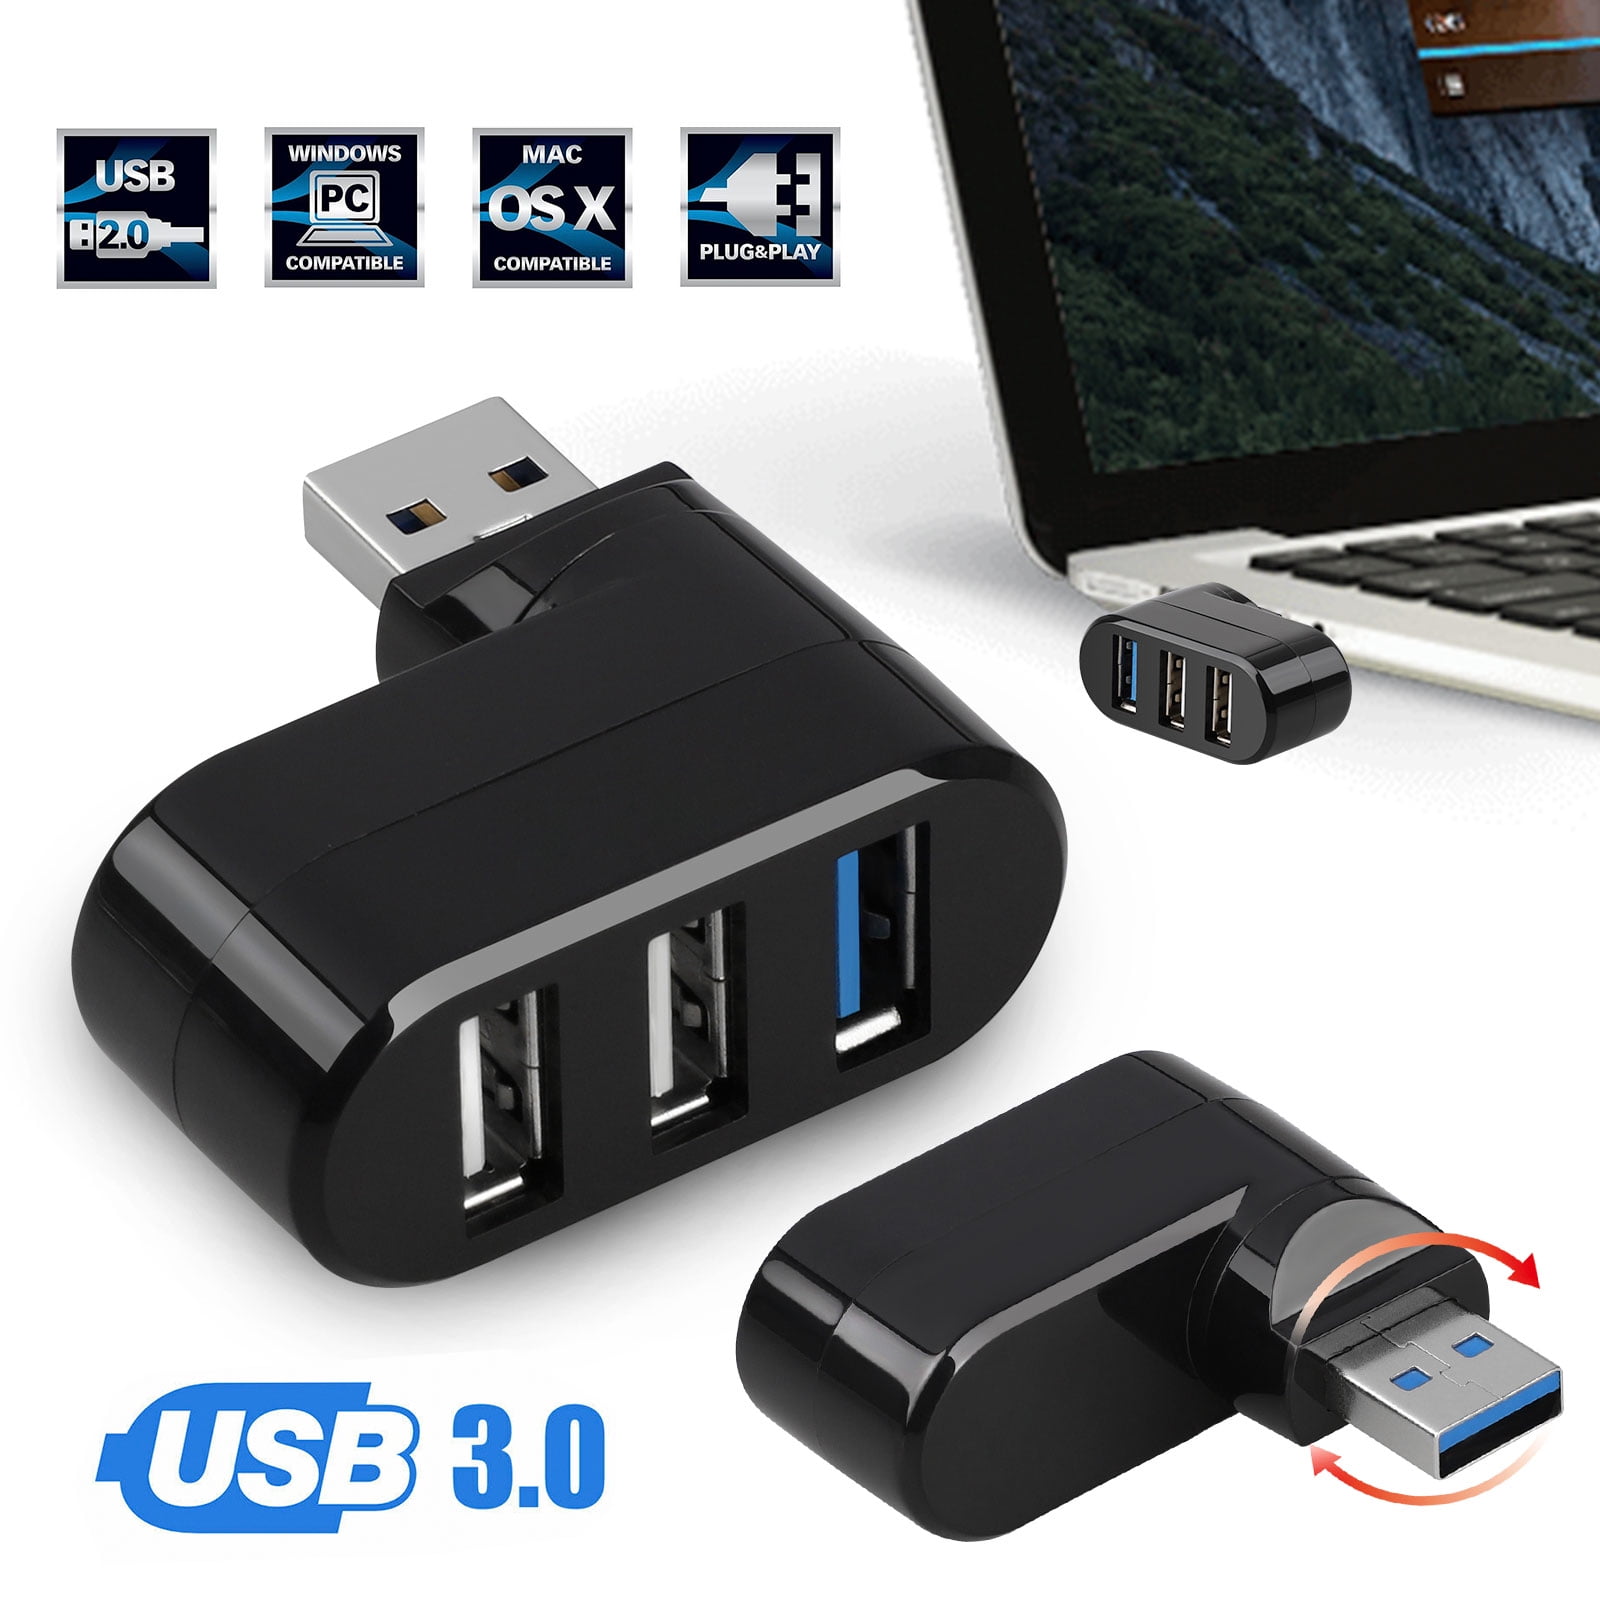 AROPANA USB 3.1 Gen 1 /USB 3.0 High Speed 5Gbps Hub for Laptop 4 Port  Portable Adapter with Individual Power ON/Off Switch and Individual Blue  LED